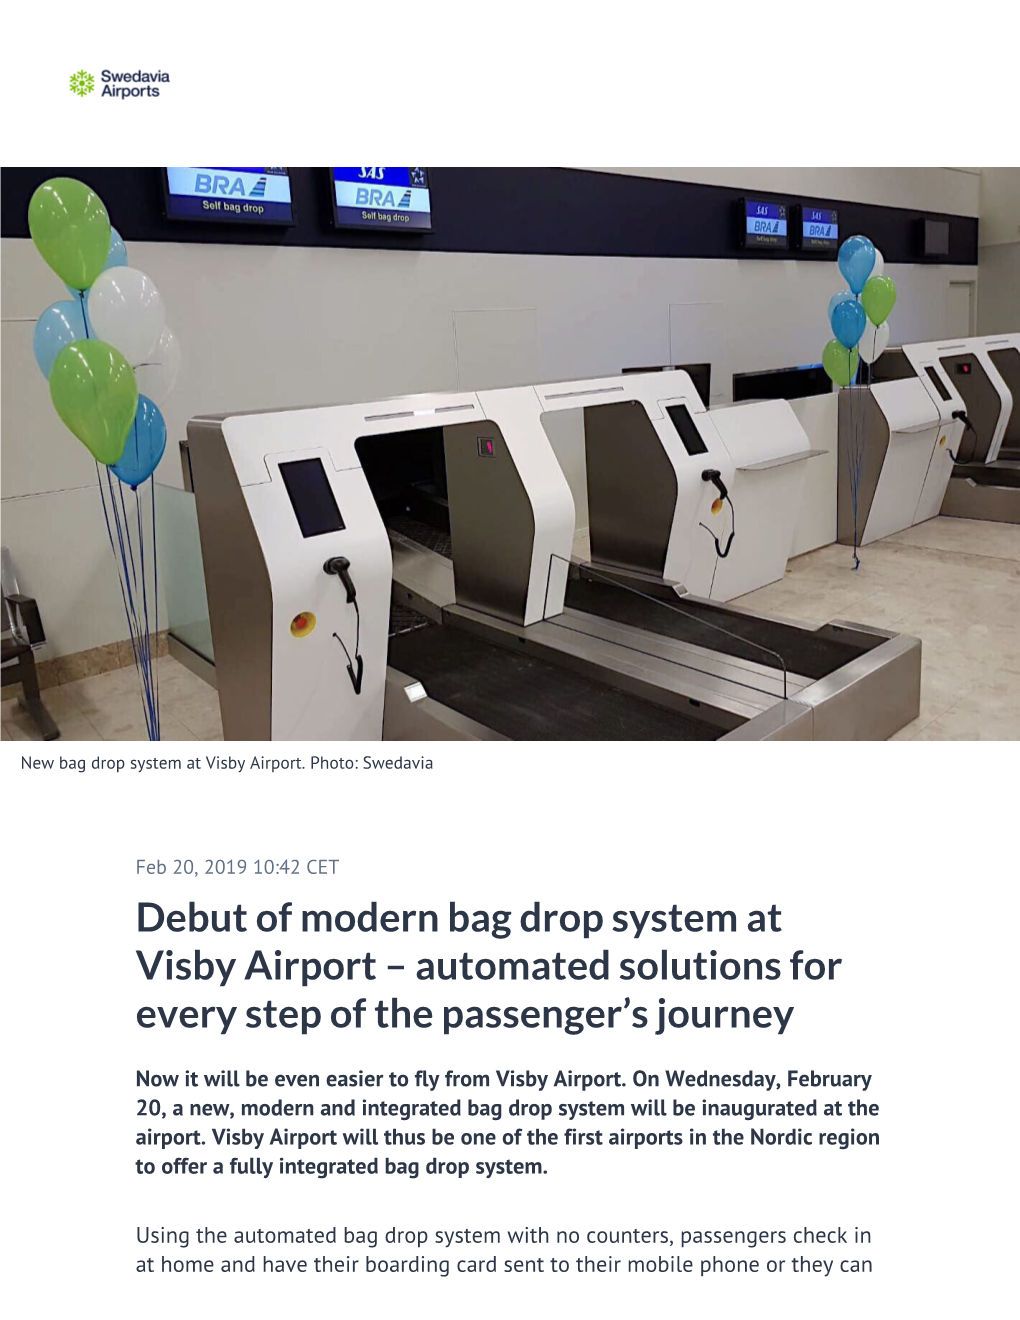 Debut of Modern Bag Drop System at Visby Airport – Automated Solutions for Every Step of the Passenger’S Journey